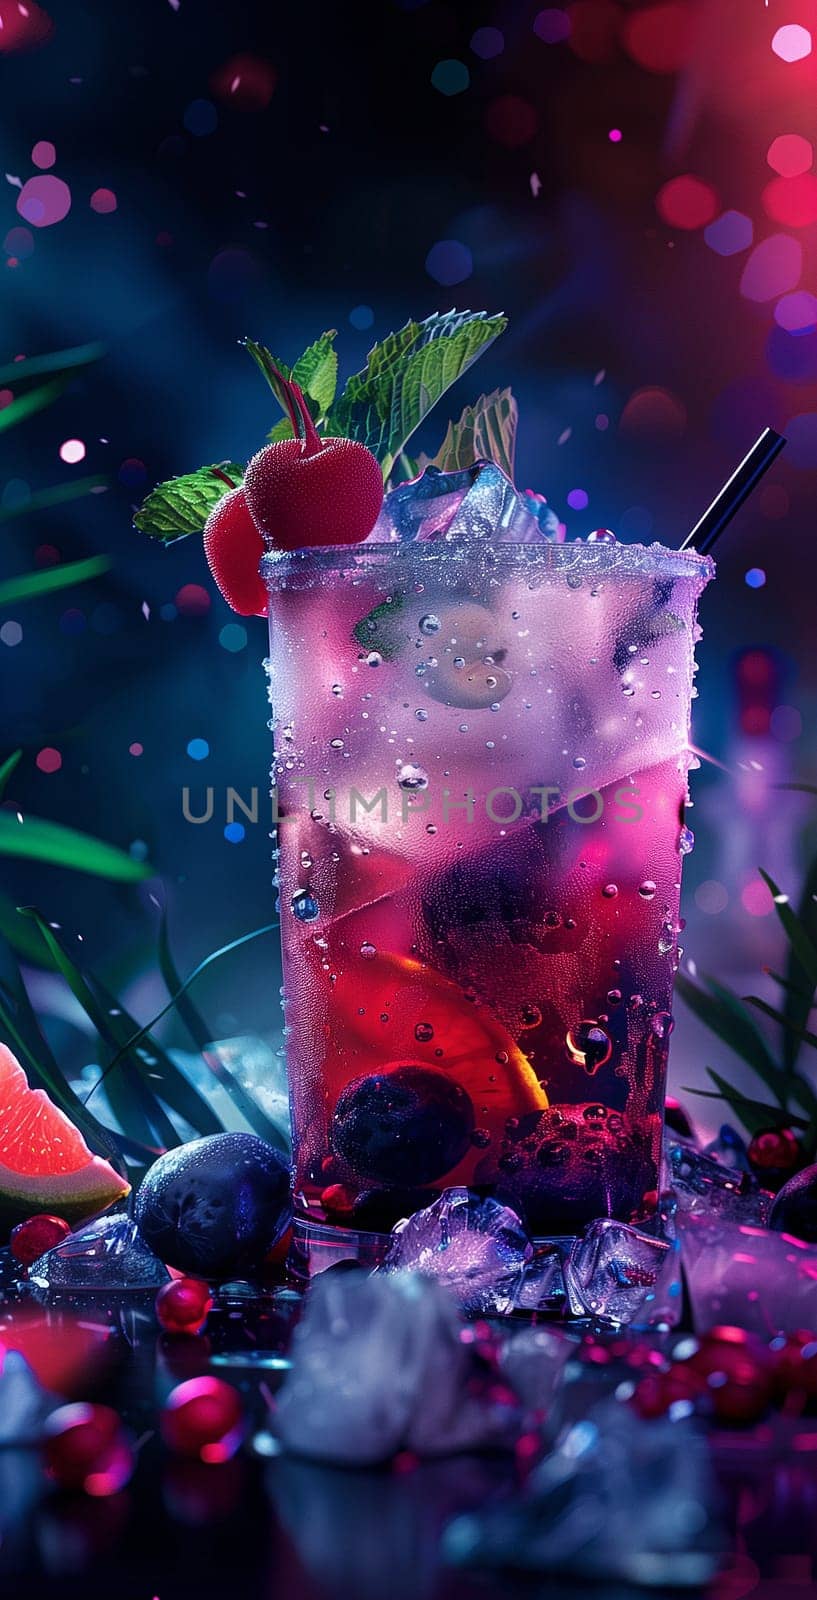 A summer cocktail at the bar. Professional photo of a fruity alcoholic cocktail. Menu cover. High quality illustration